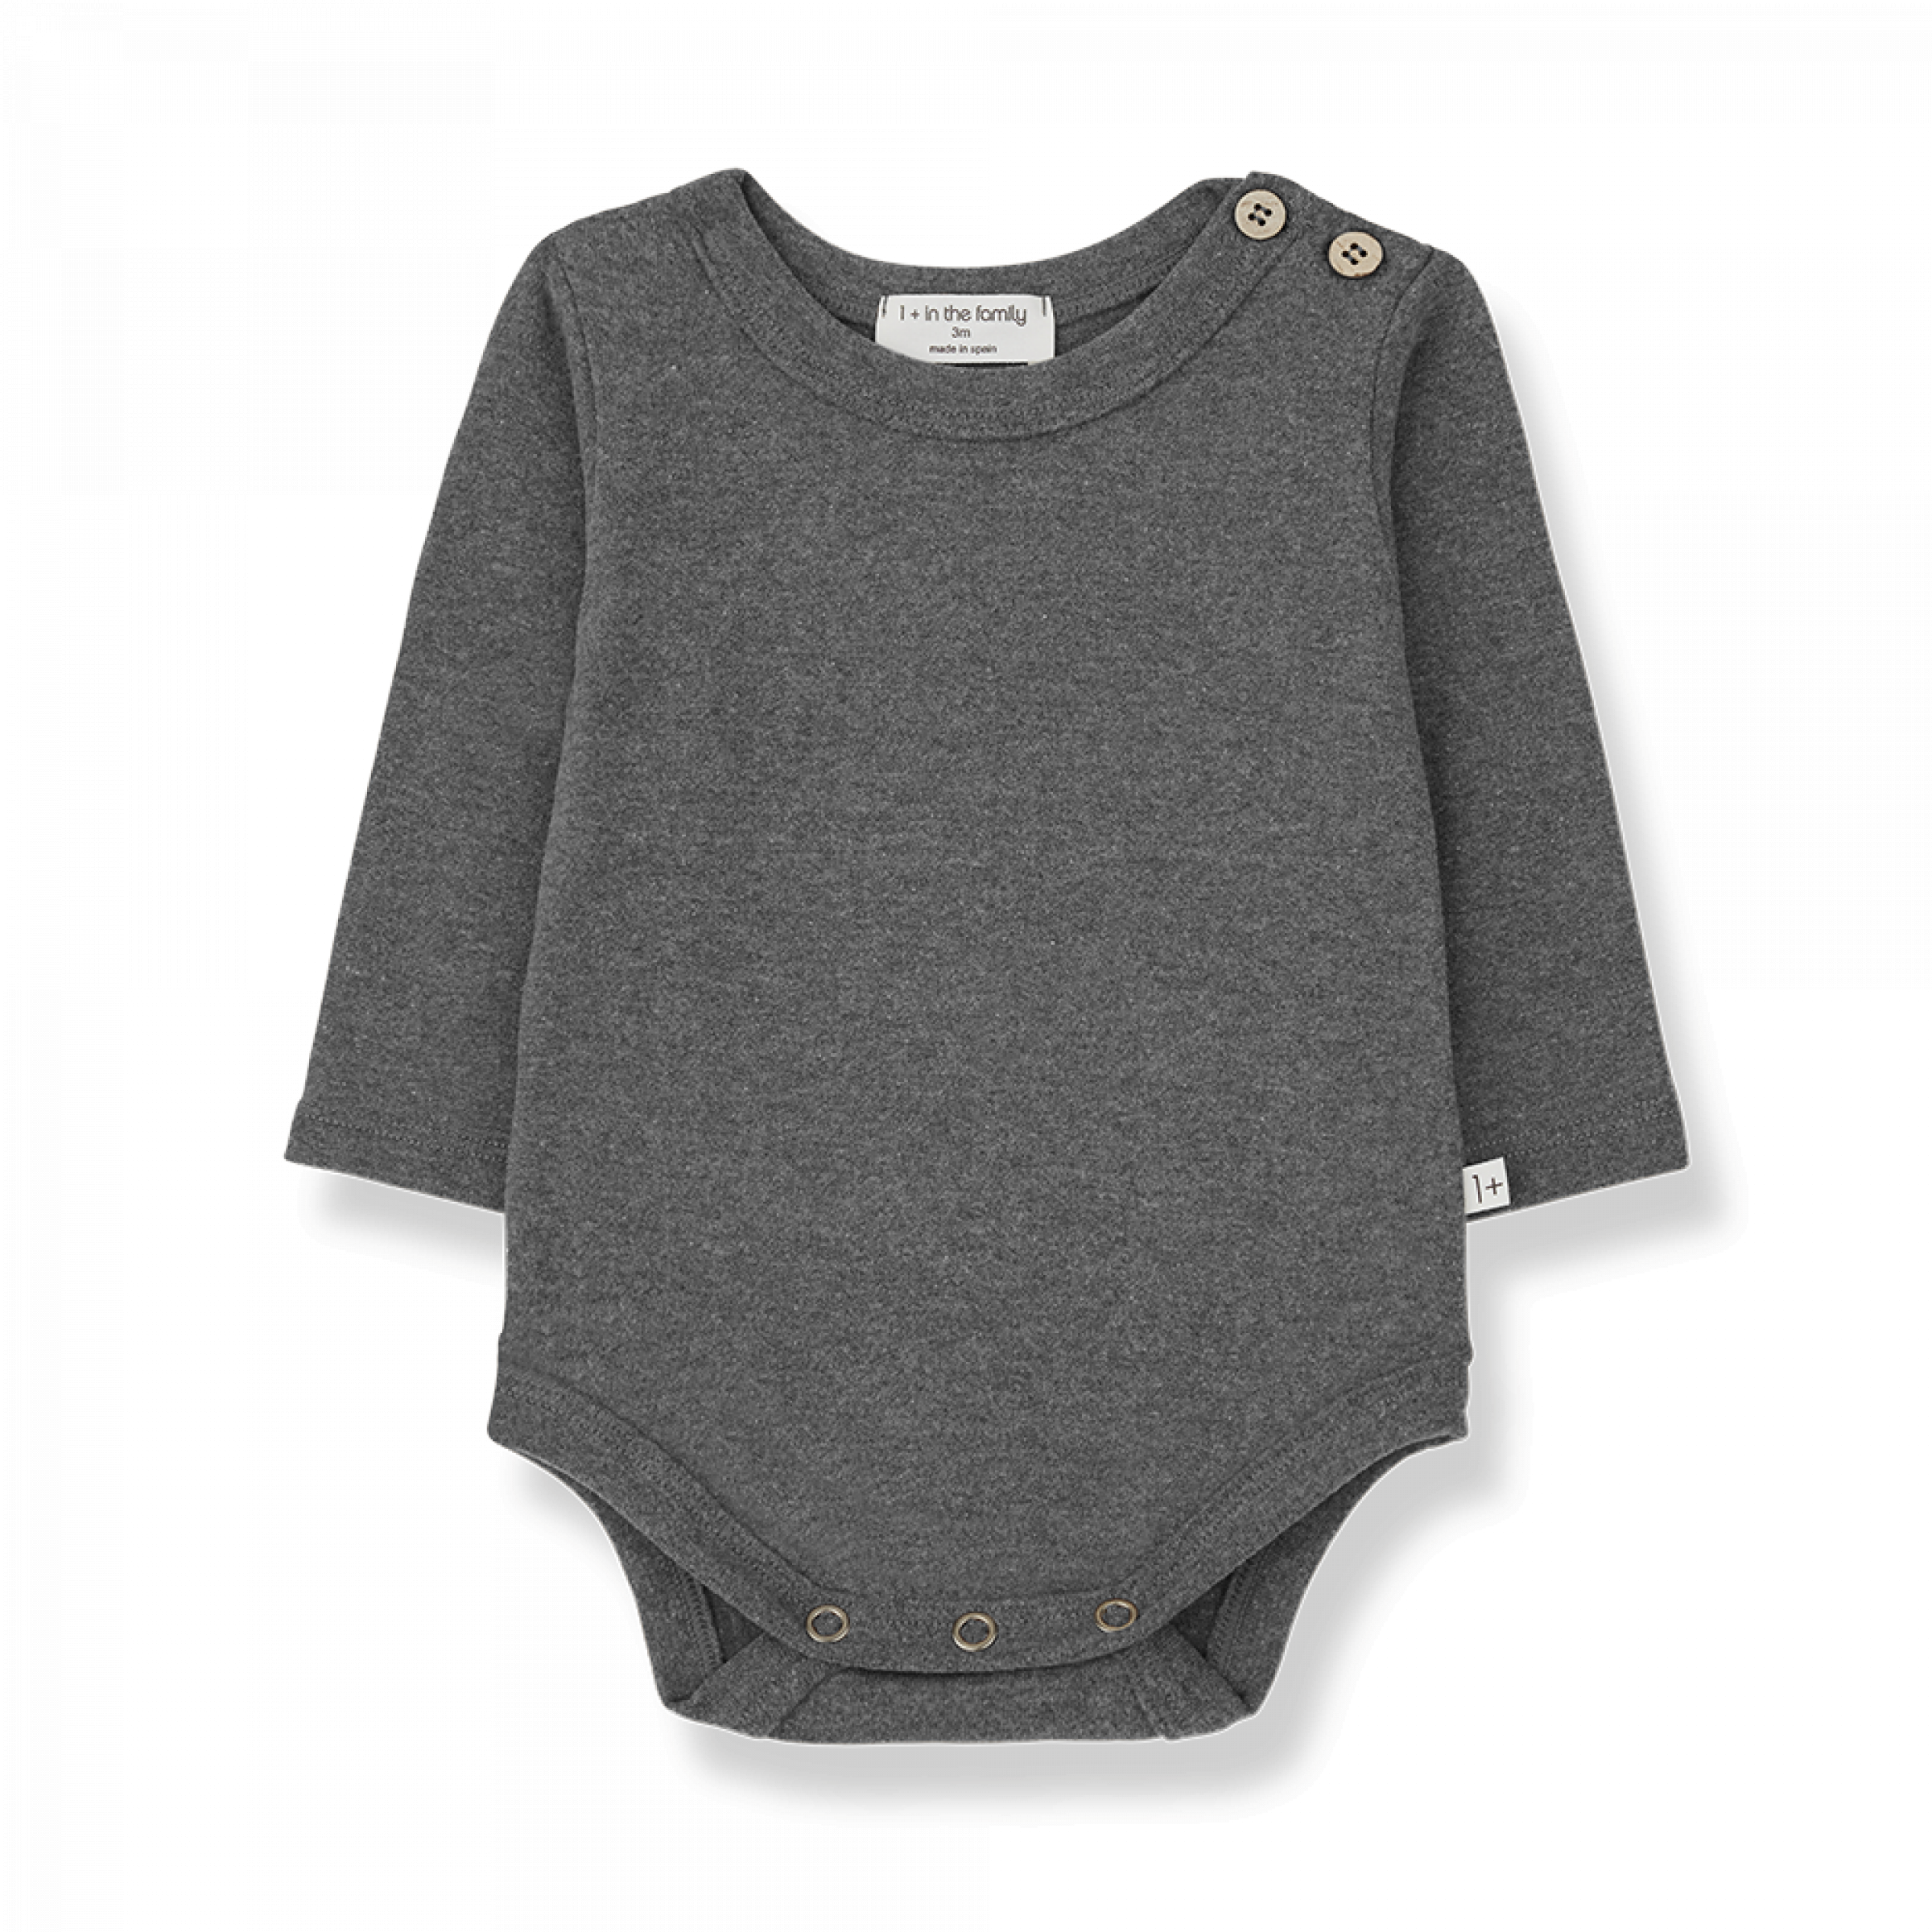 1+ in the Family Long Sleeves baby cotton onesie in grey